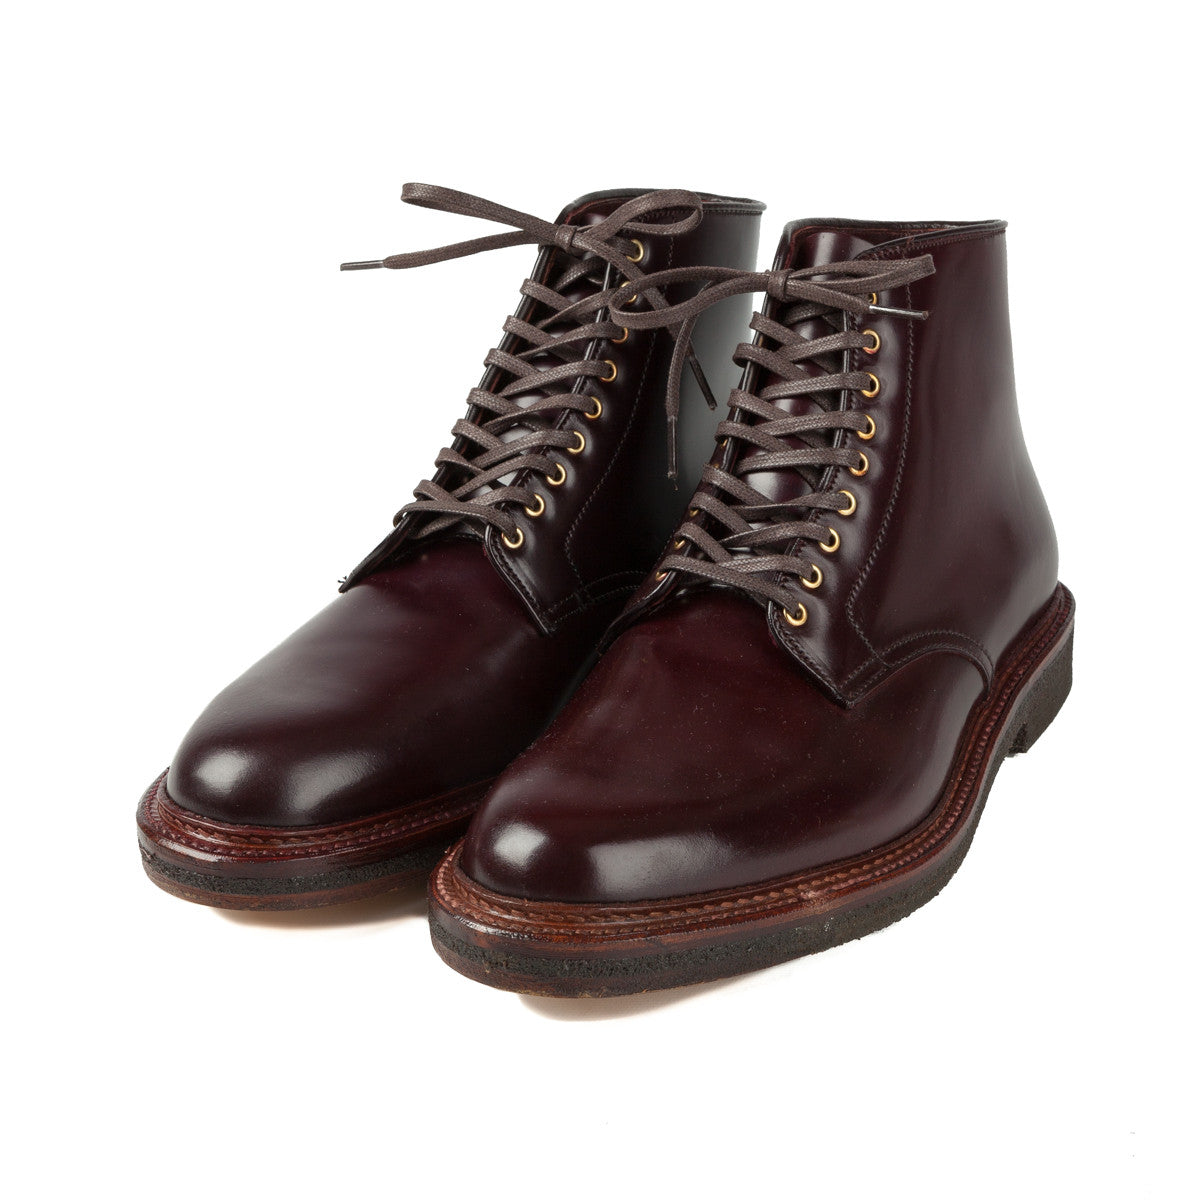 Alden x Frans Boone plain toe boots in #8 cordovan on crepe - Frans ...